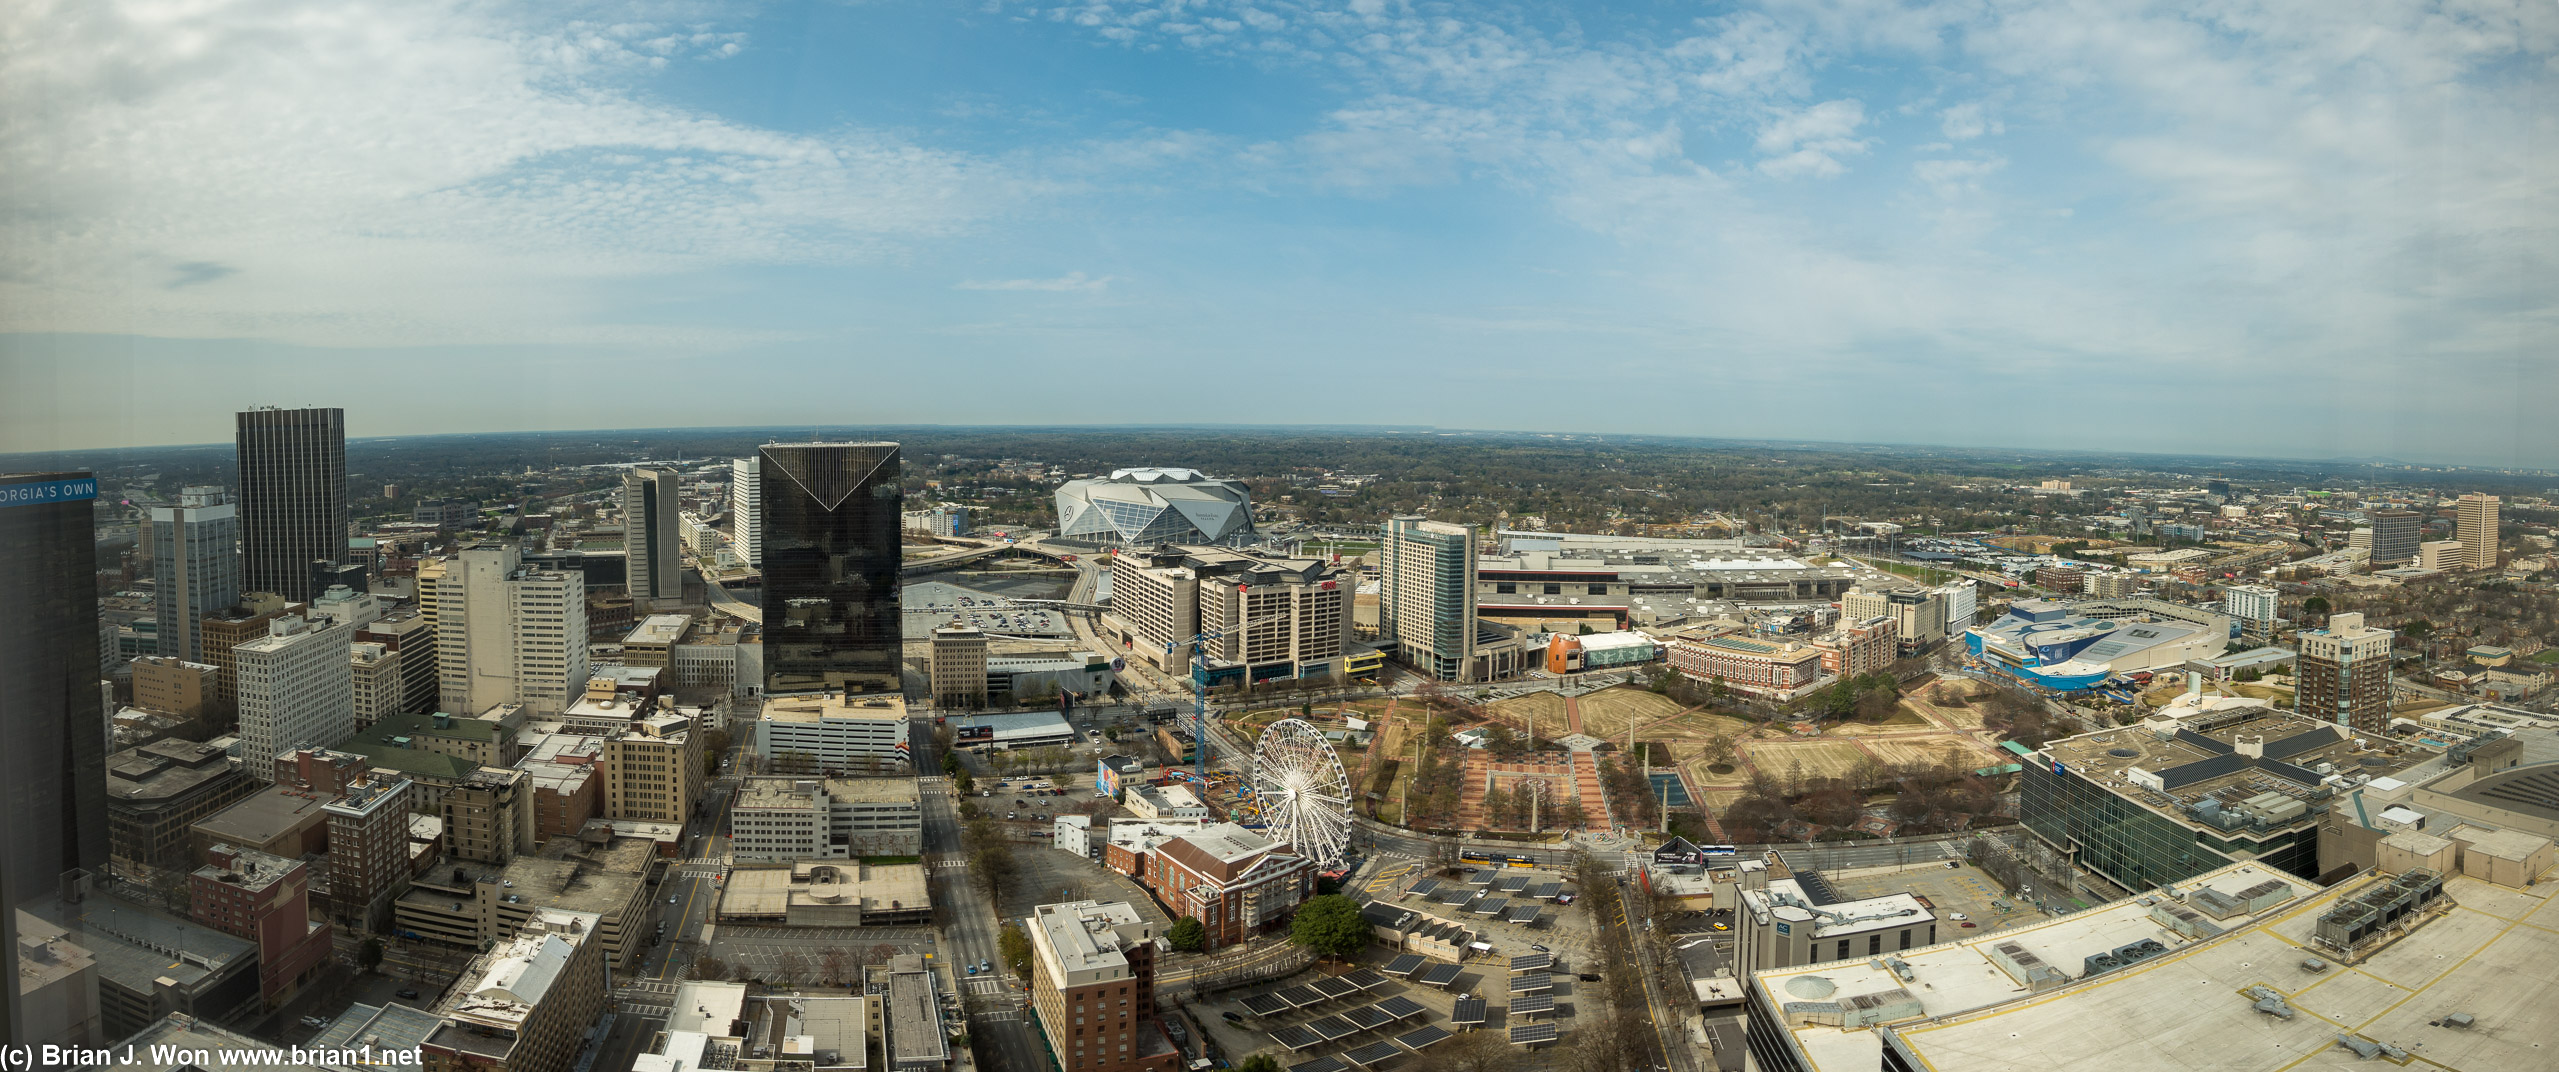 The view from the top of the Westin Peachtree Plaza.